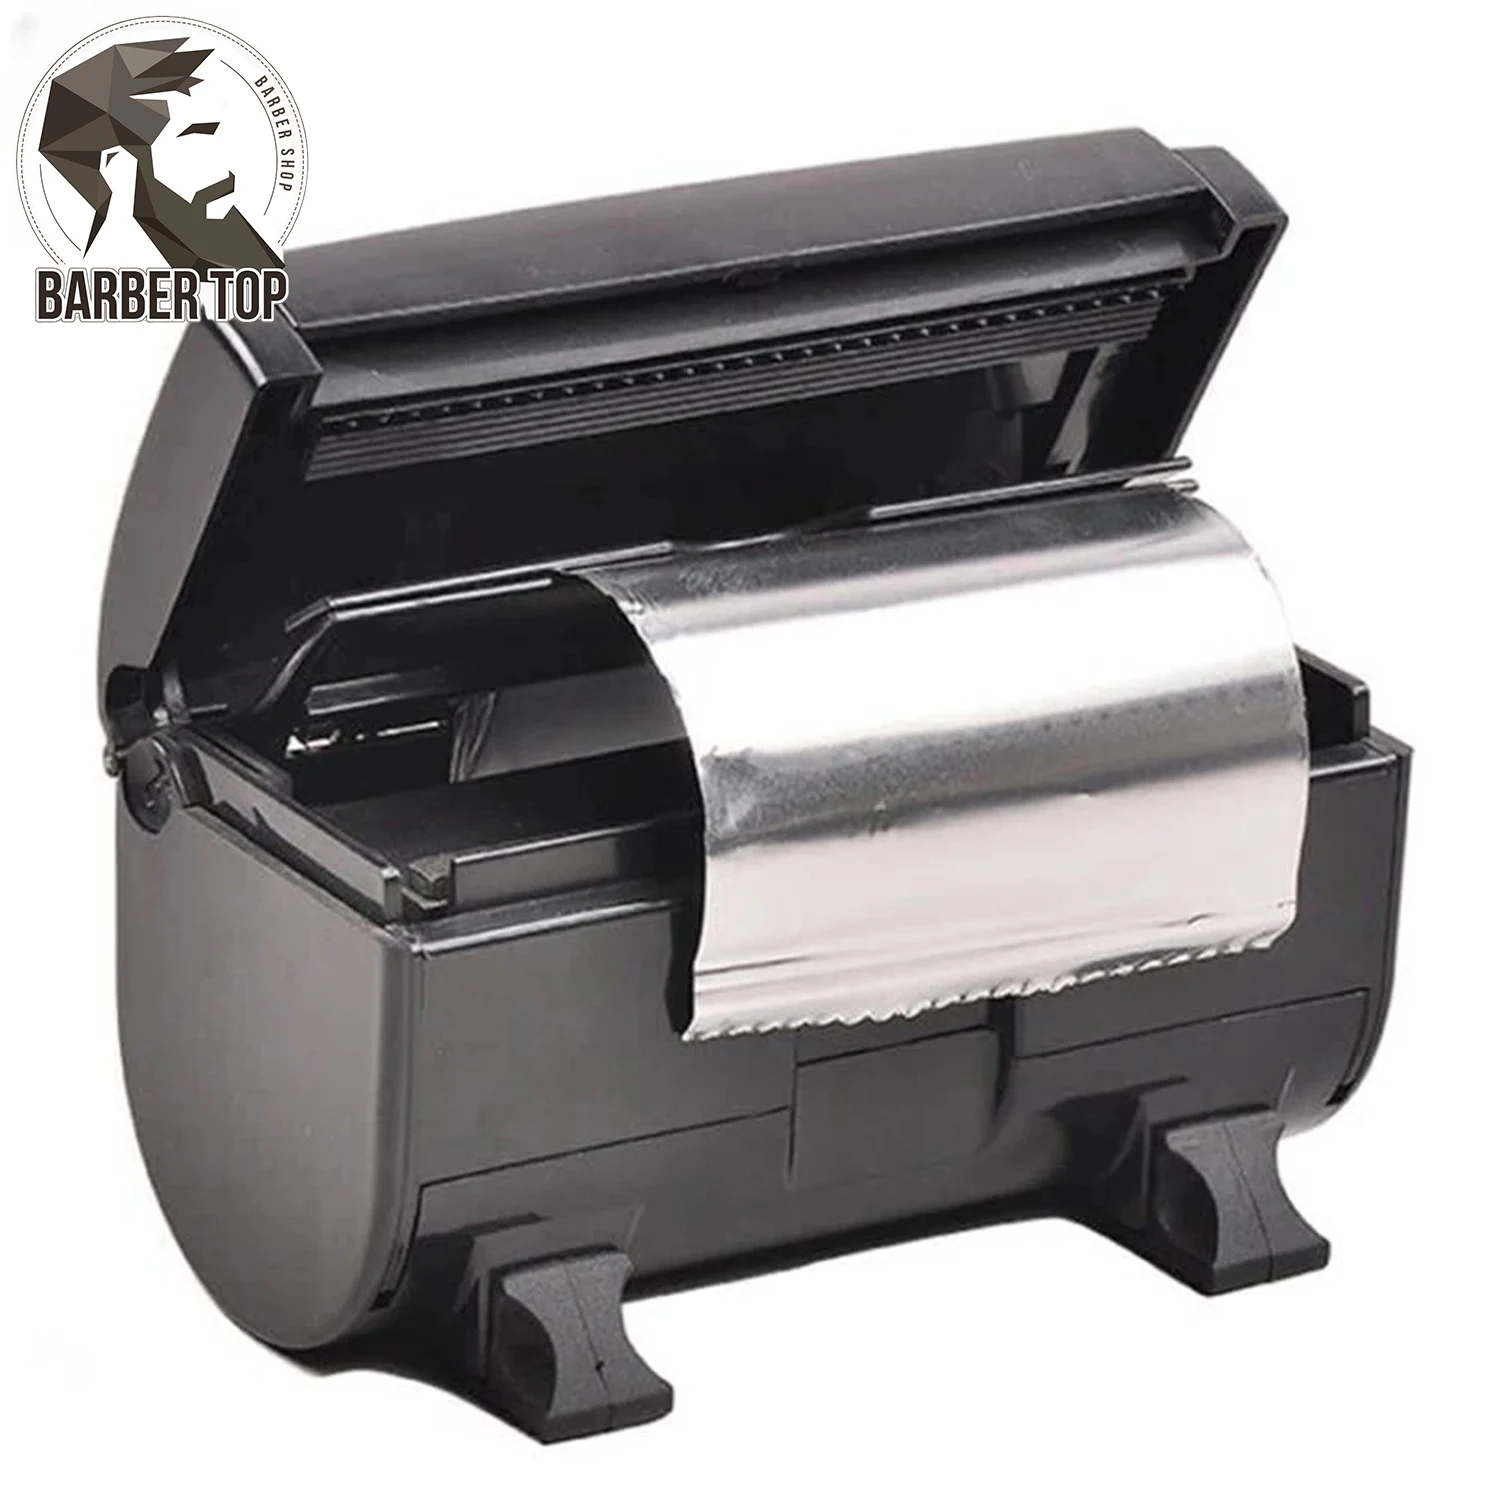 Barber Tin Foil Cutter Nail Art TinFoil Storage Box Automatic Compact Foil Paper Dispenser Hairdressing Barbershop Accessories